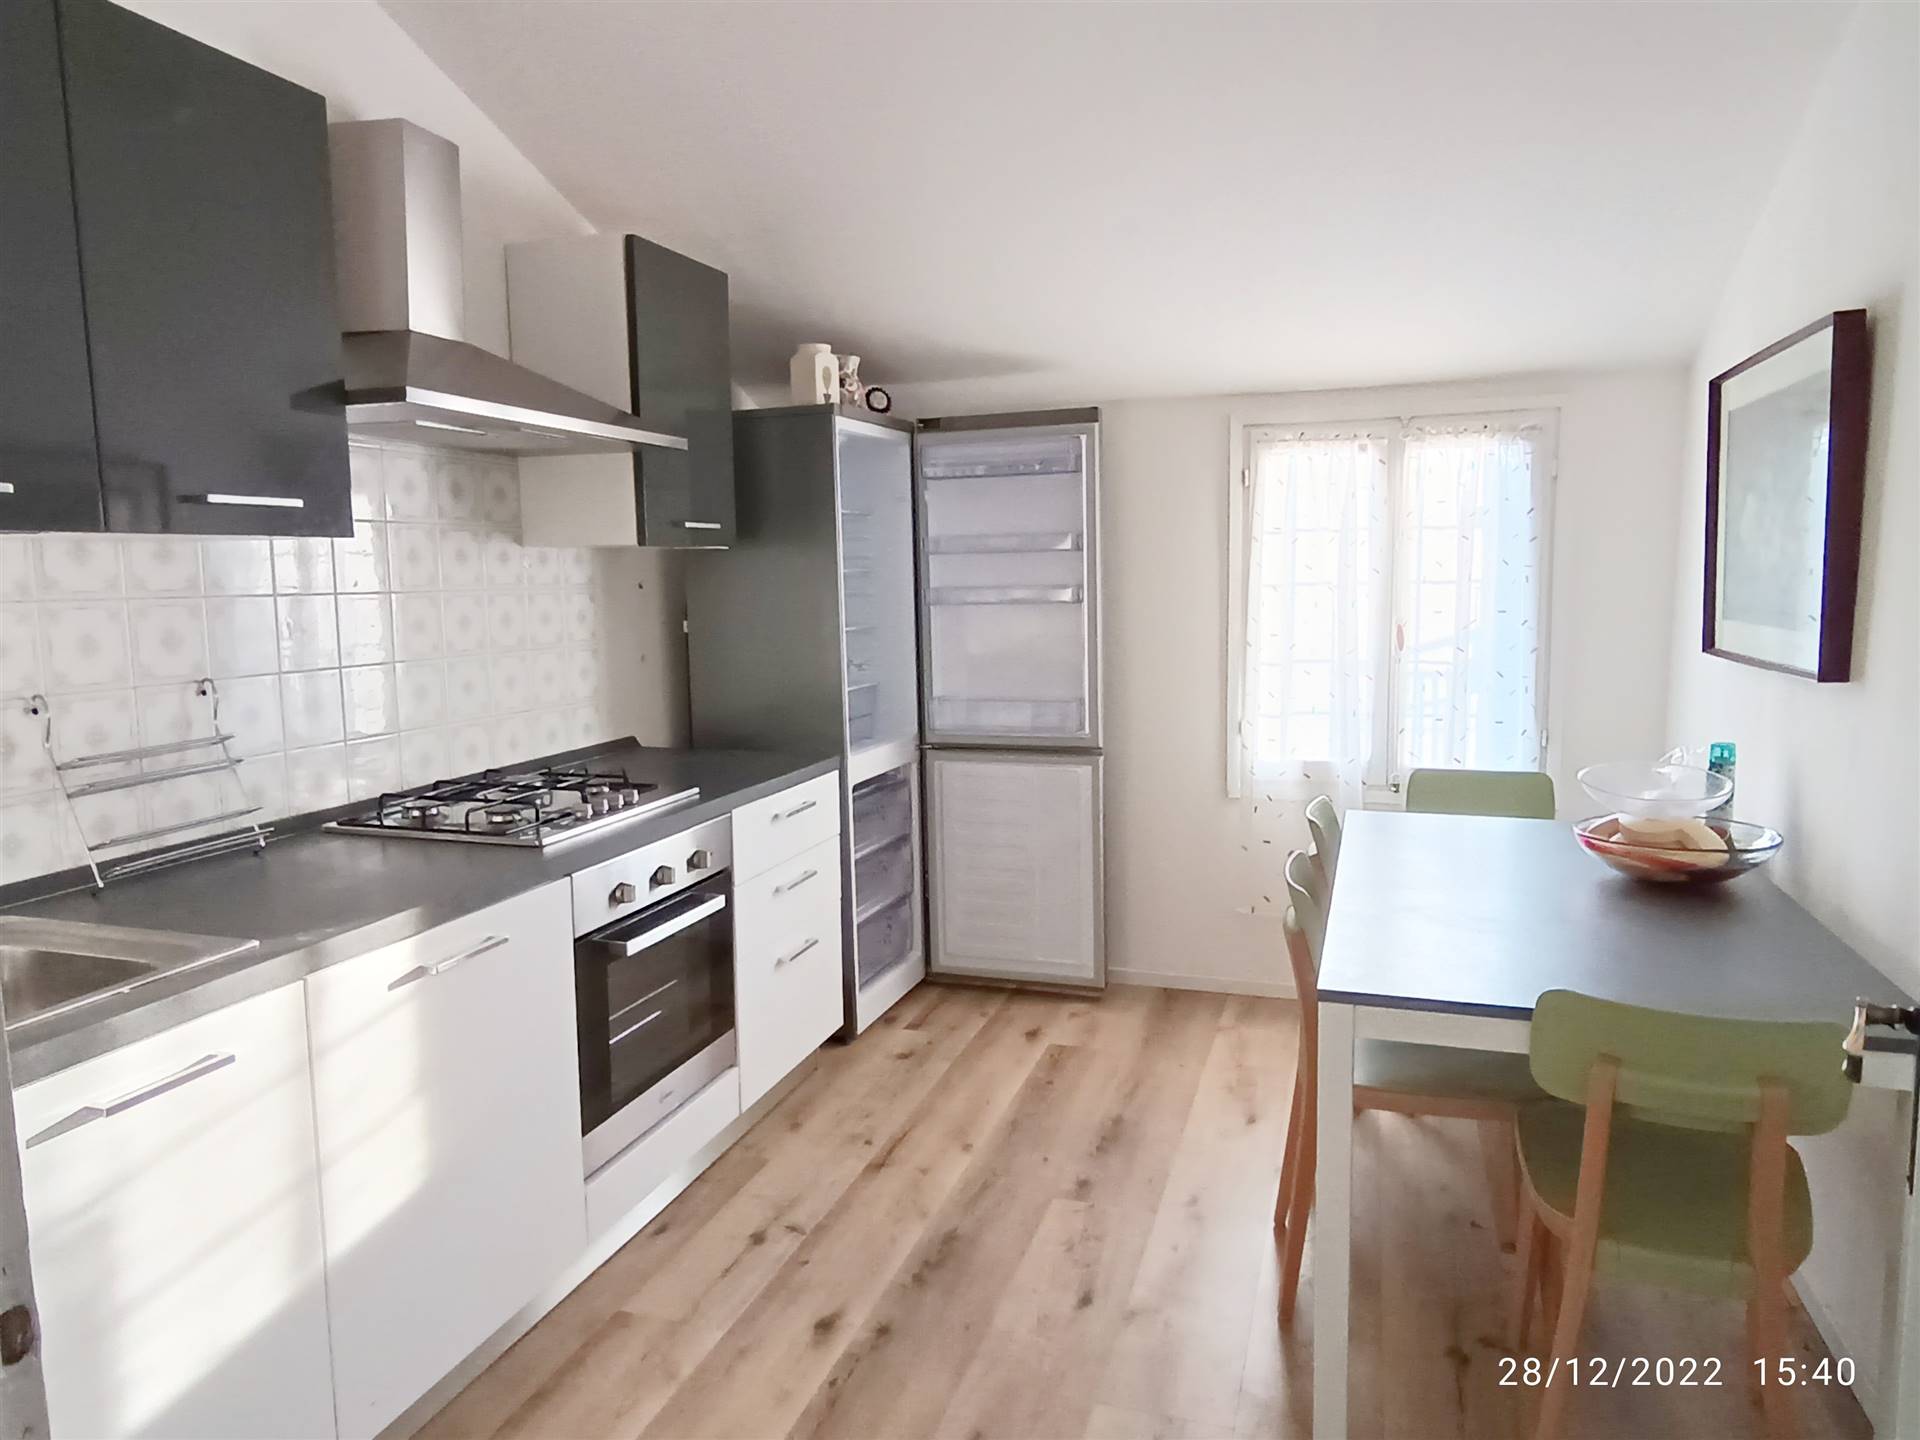 ORGNANO, SPINEA, Detached apartment for sale of 135 Sq. mt., Habitable, Heating Non-existent, Energetic class: F, placed at 1° on 1, composed by: 5 